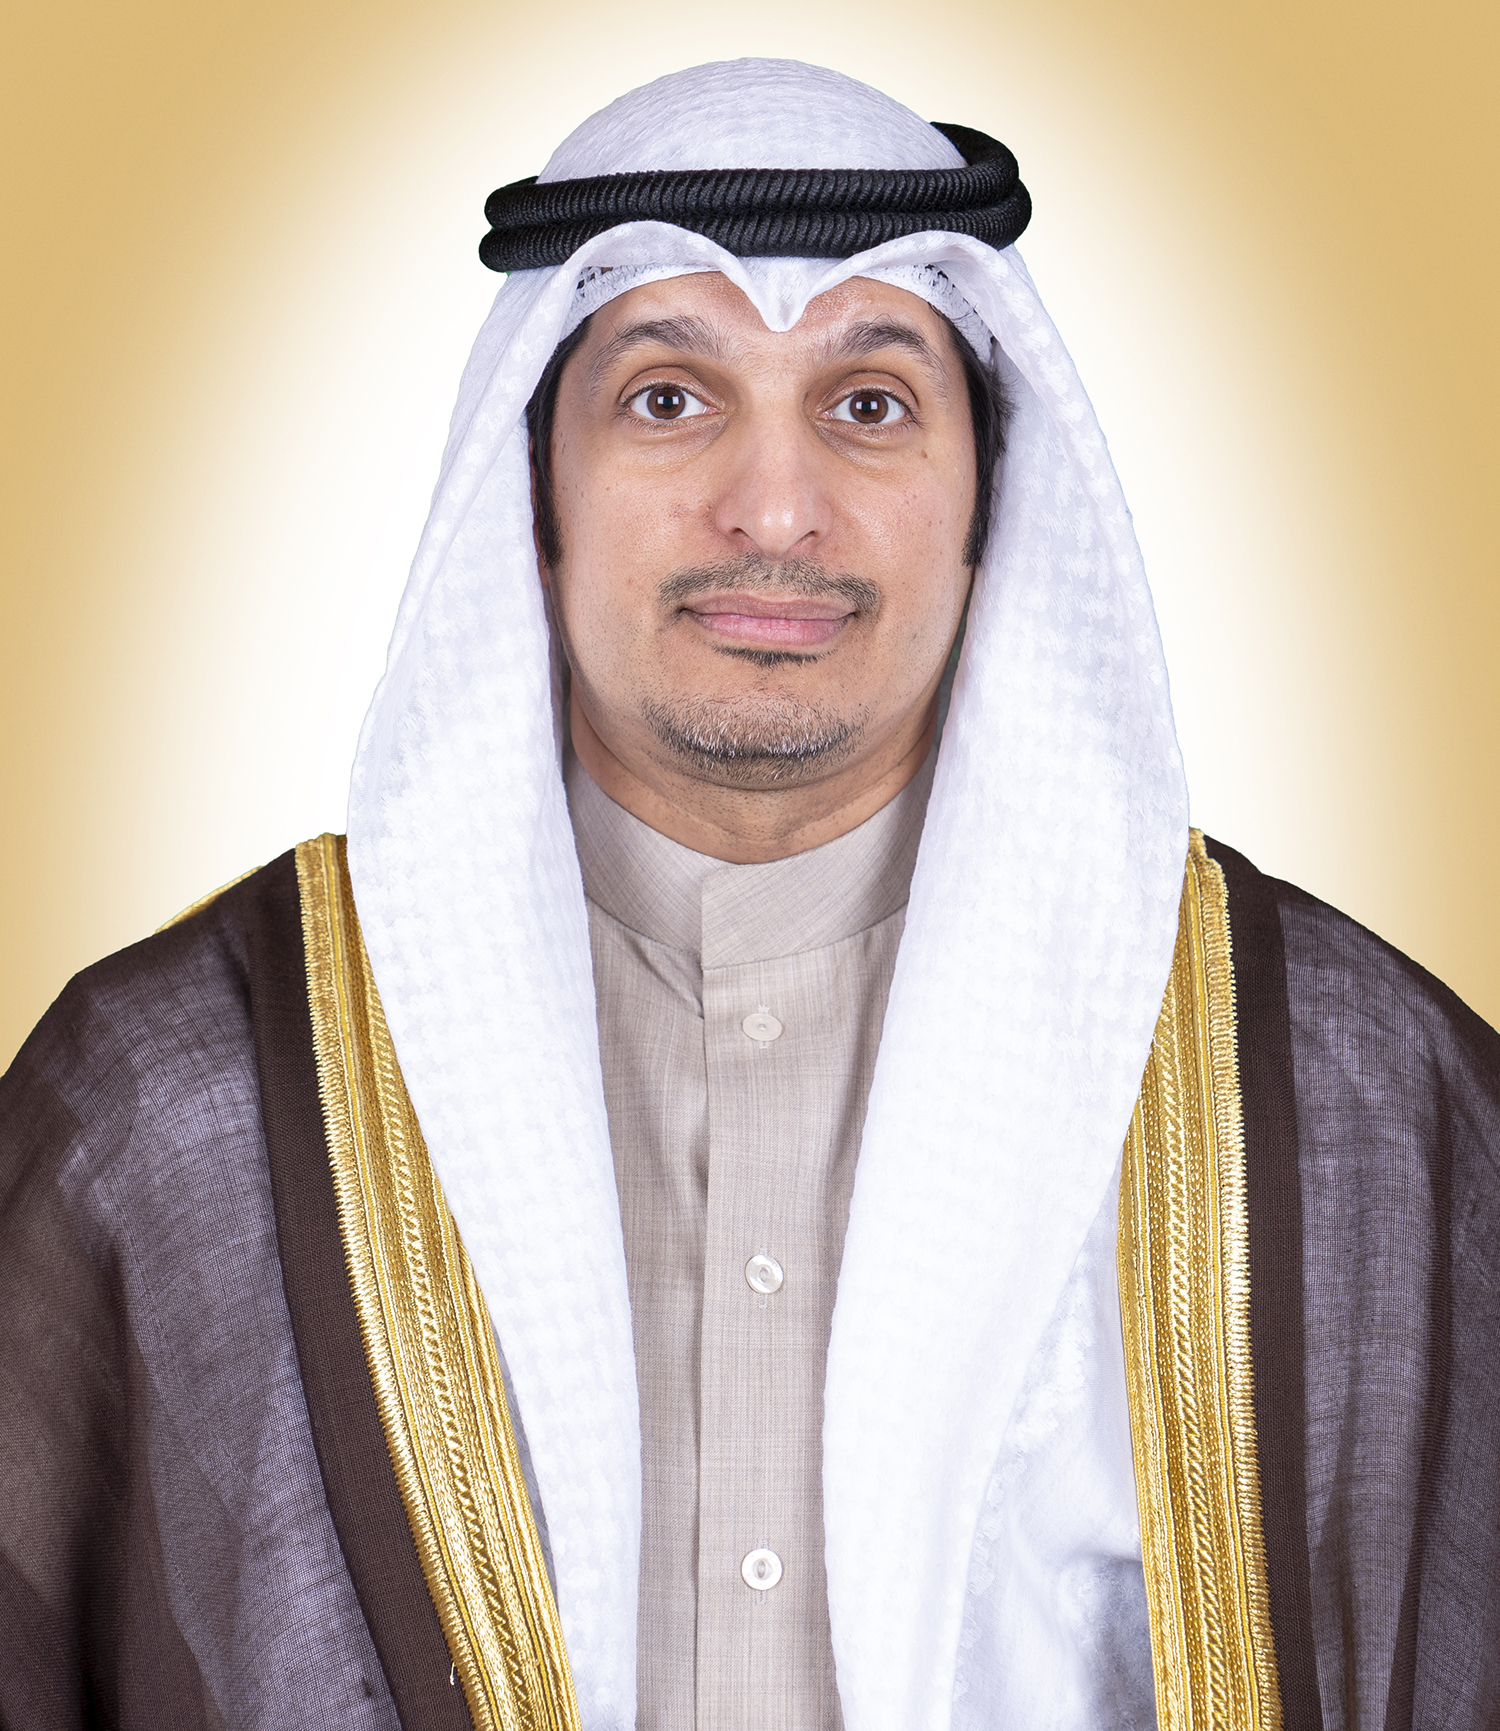 Minister of Information and Minister of State for Youth Affairs Abdulrahman Al-Mutairi